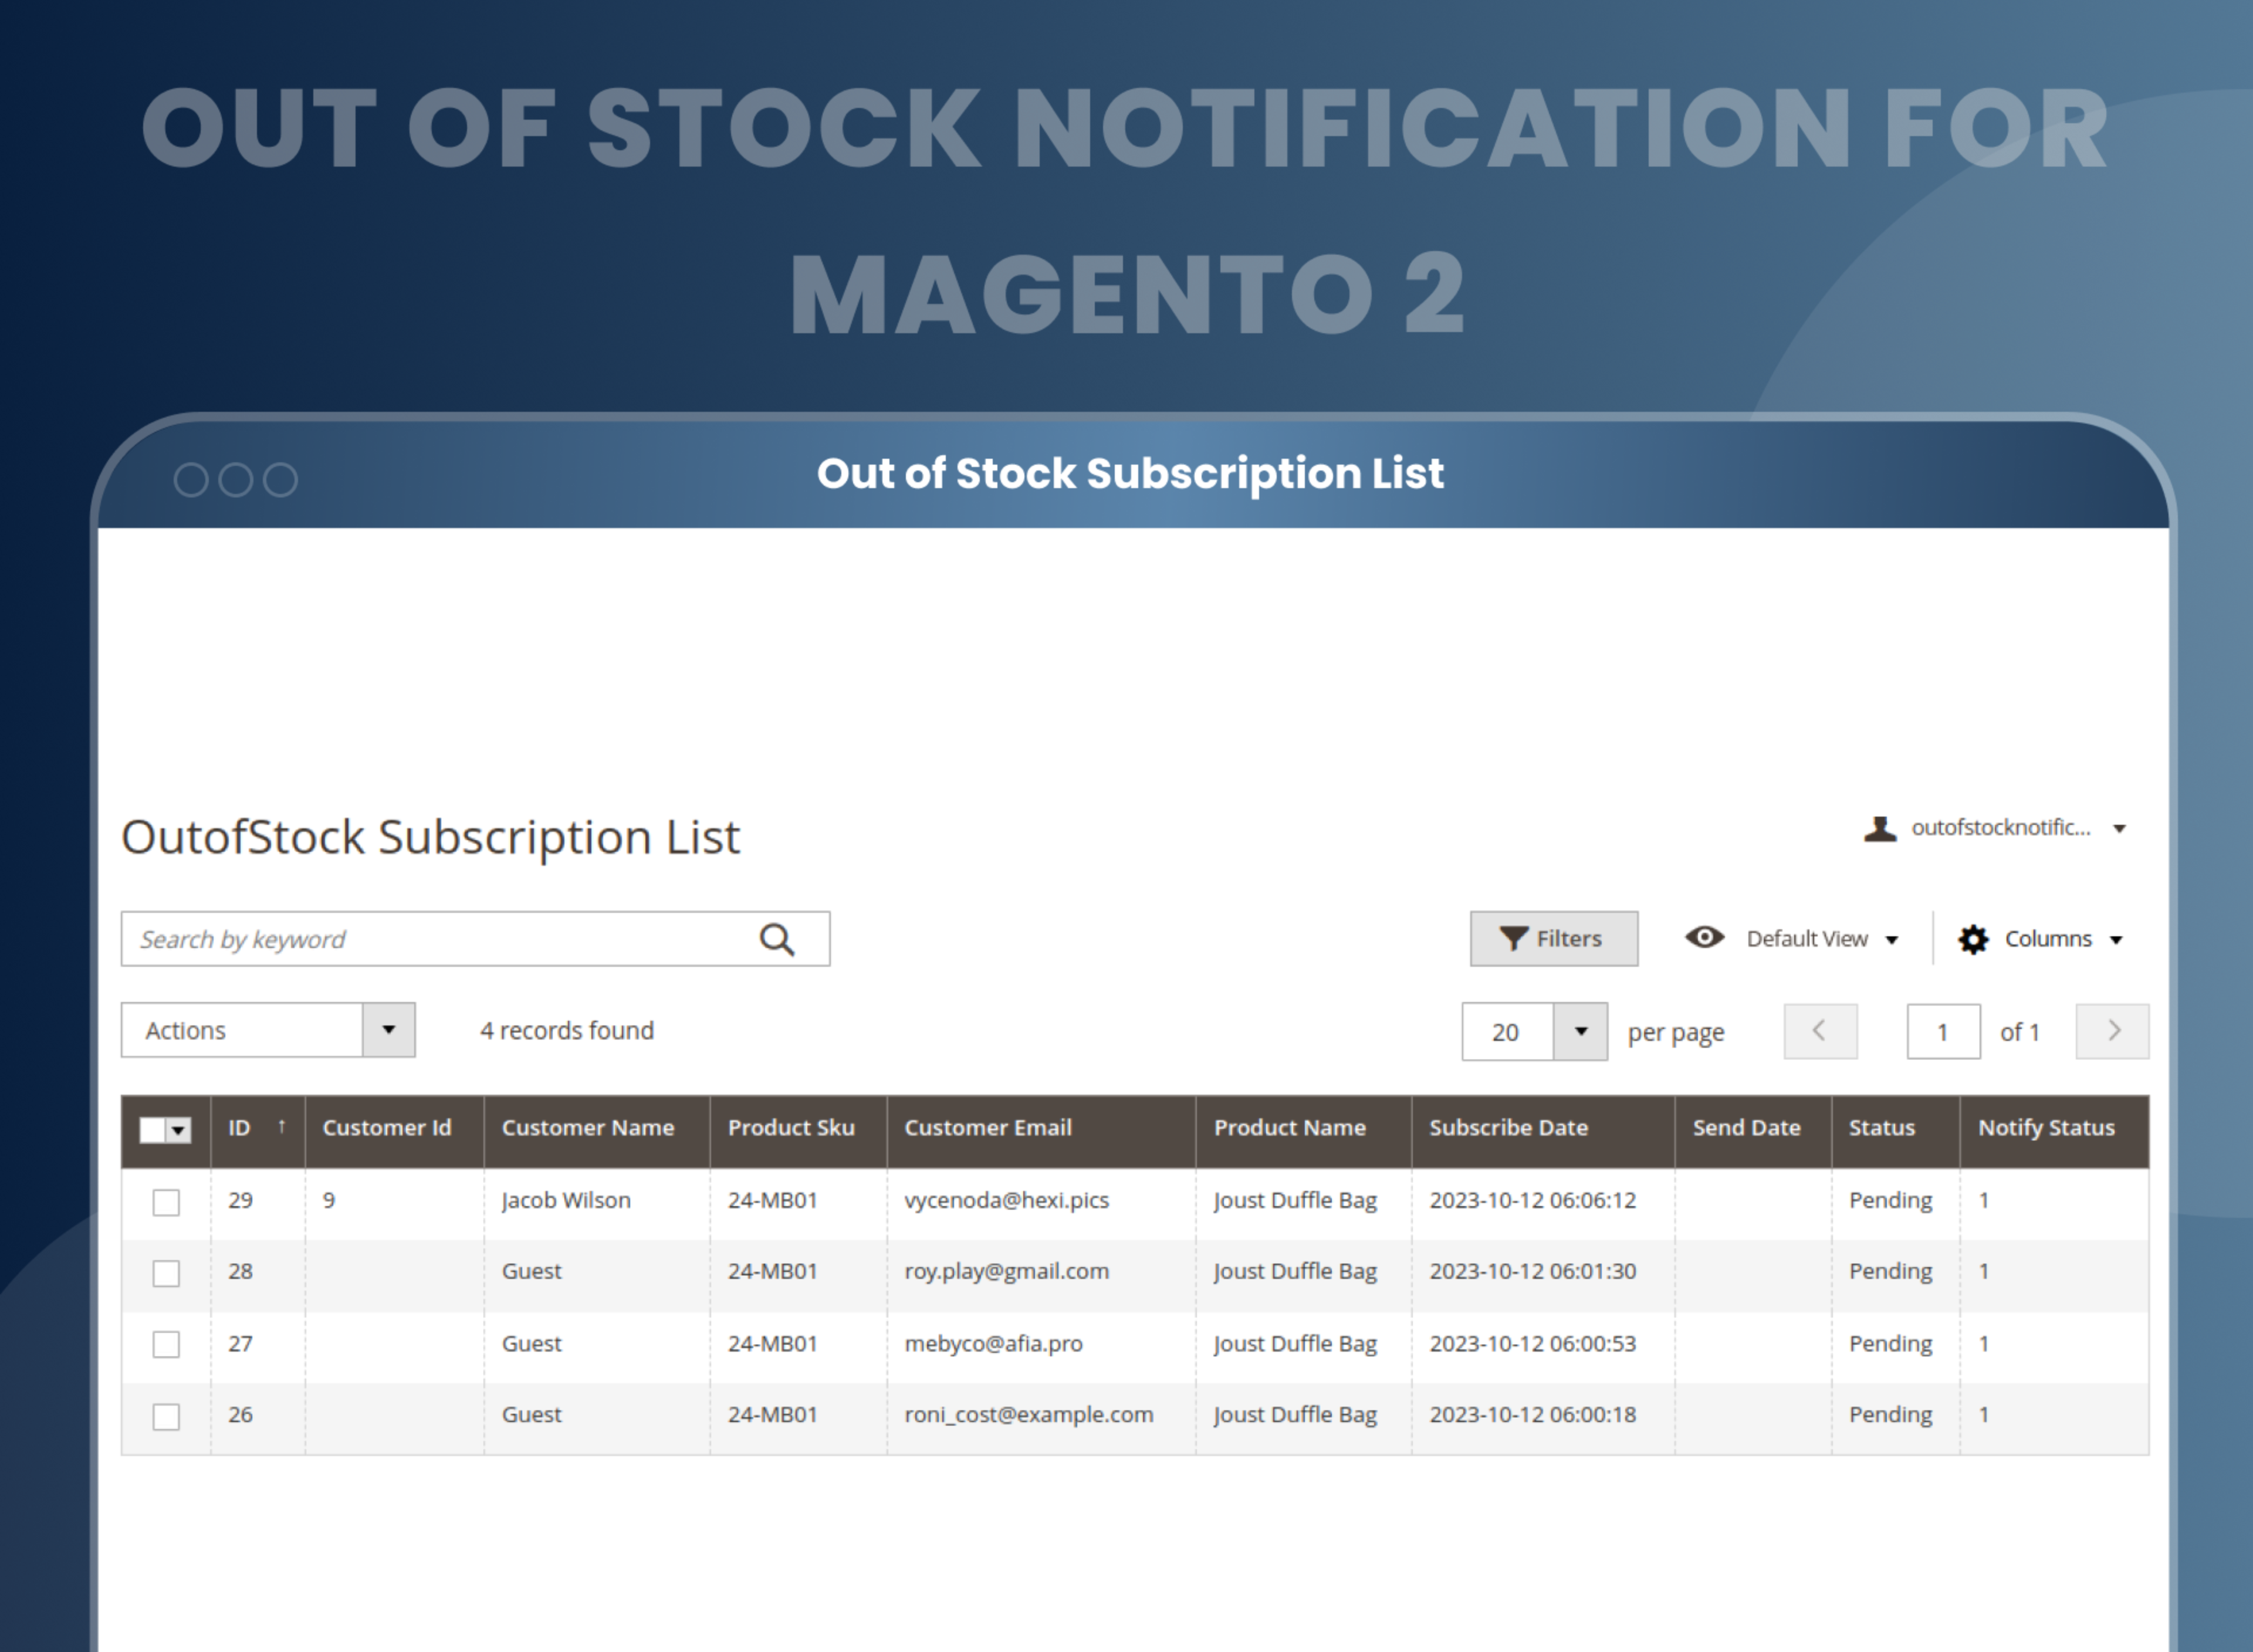 Out of Stock Subscription List